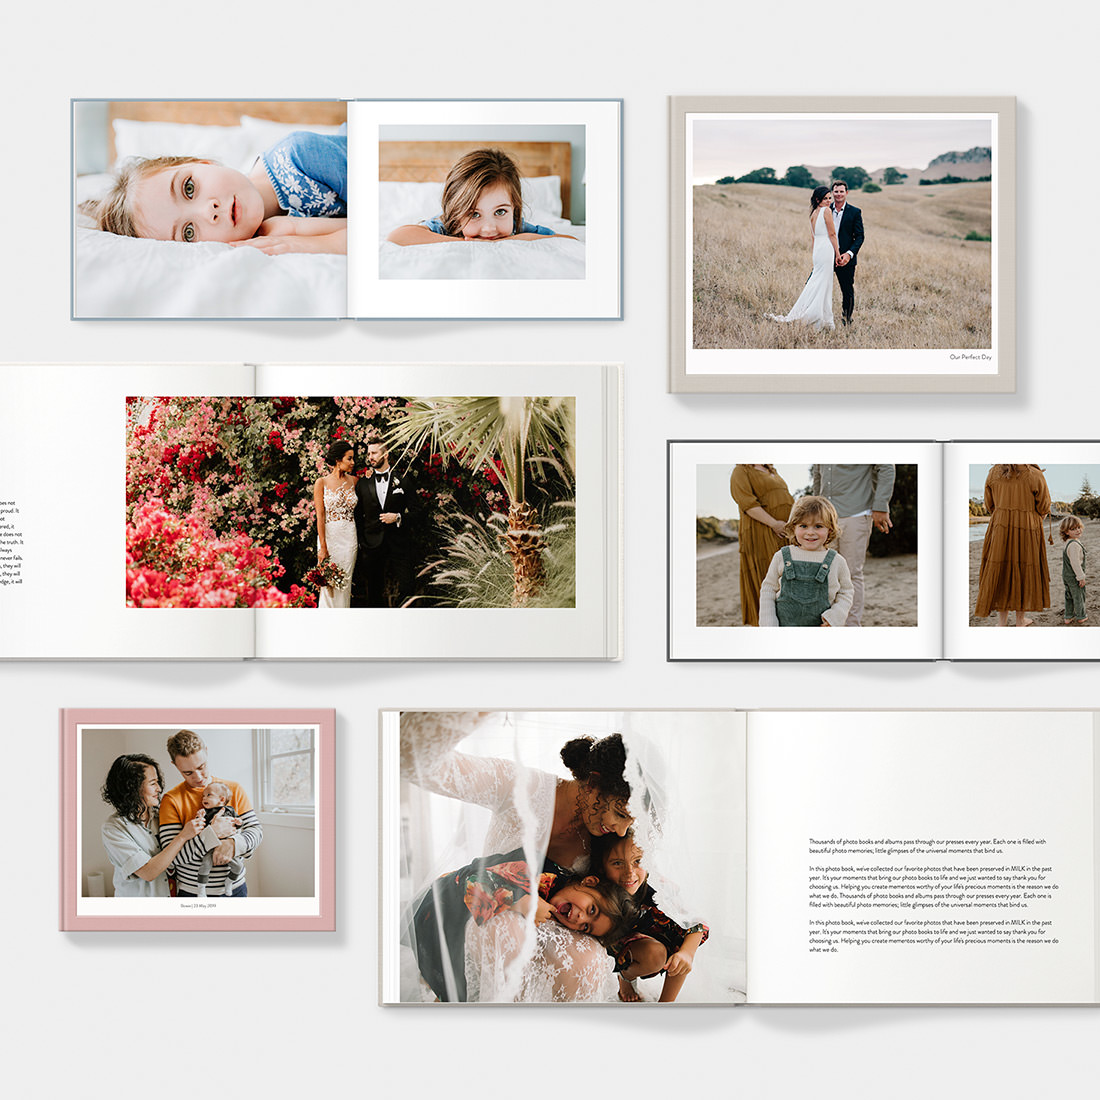 Selection of classic photo albums showing photo templates